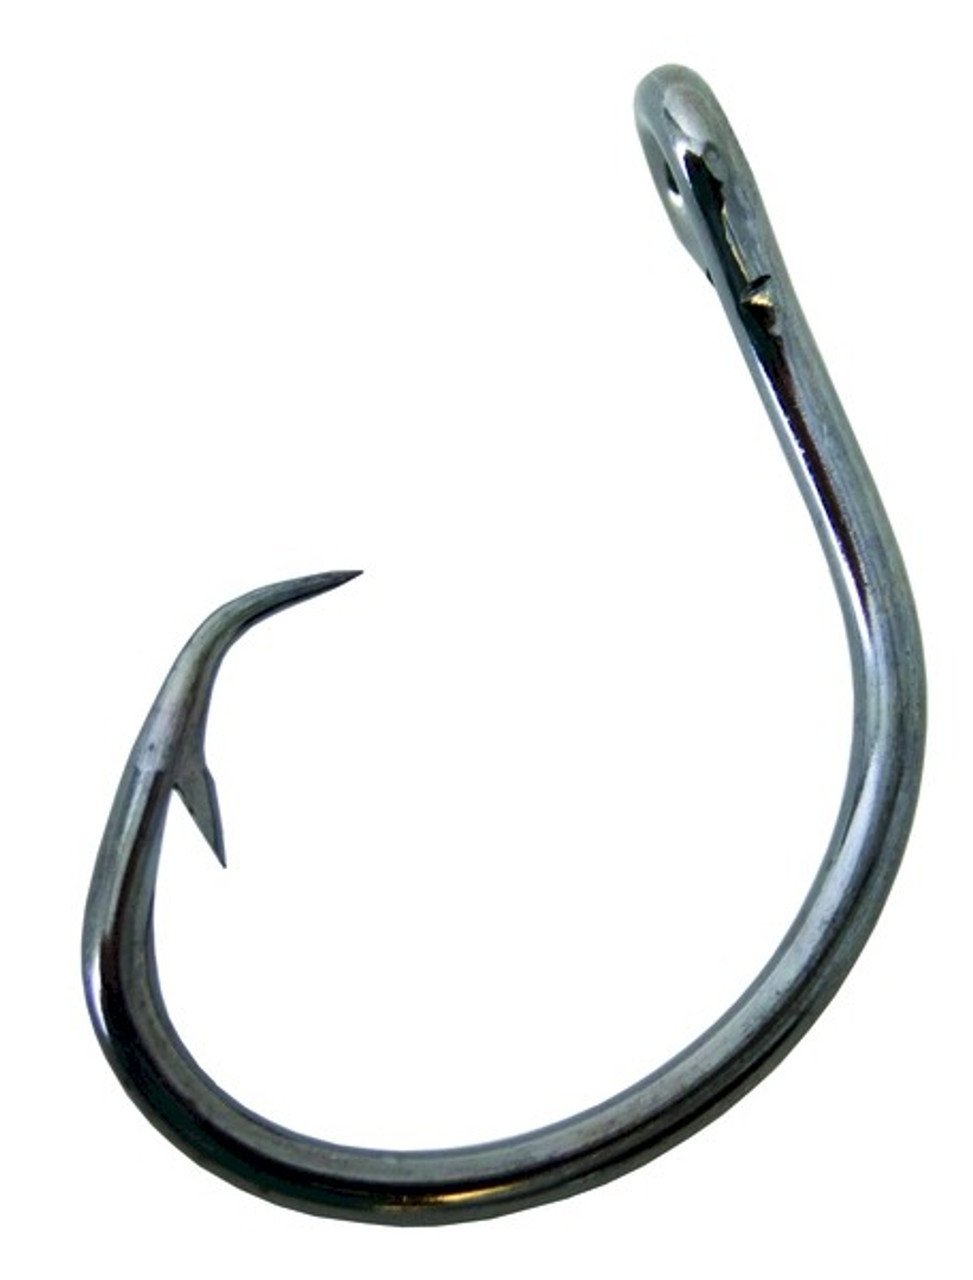 Mustad 39951NP-RB Ultra Point Size 3/0 Red Circle Hooks Jagged Tooth Tackle